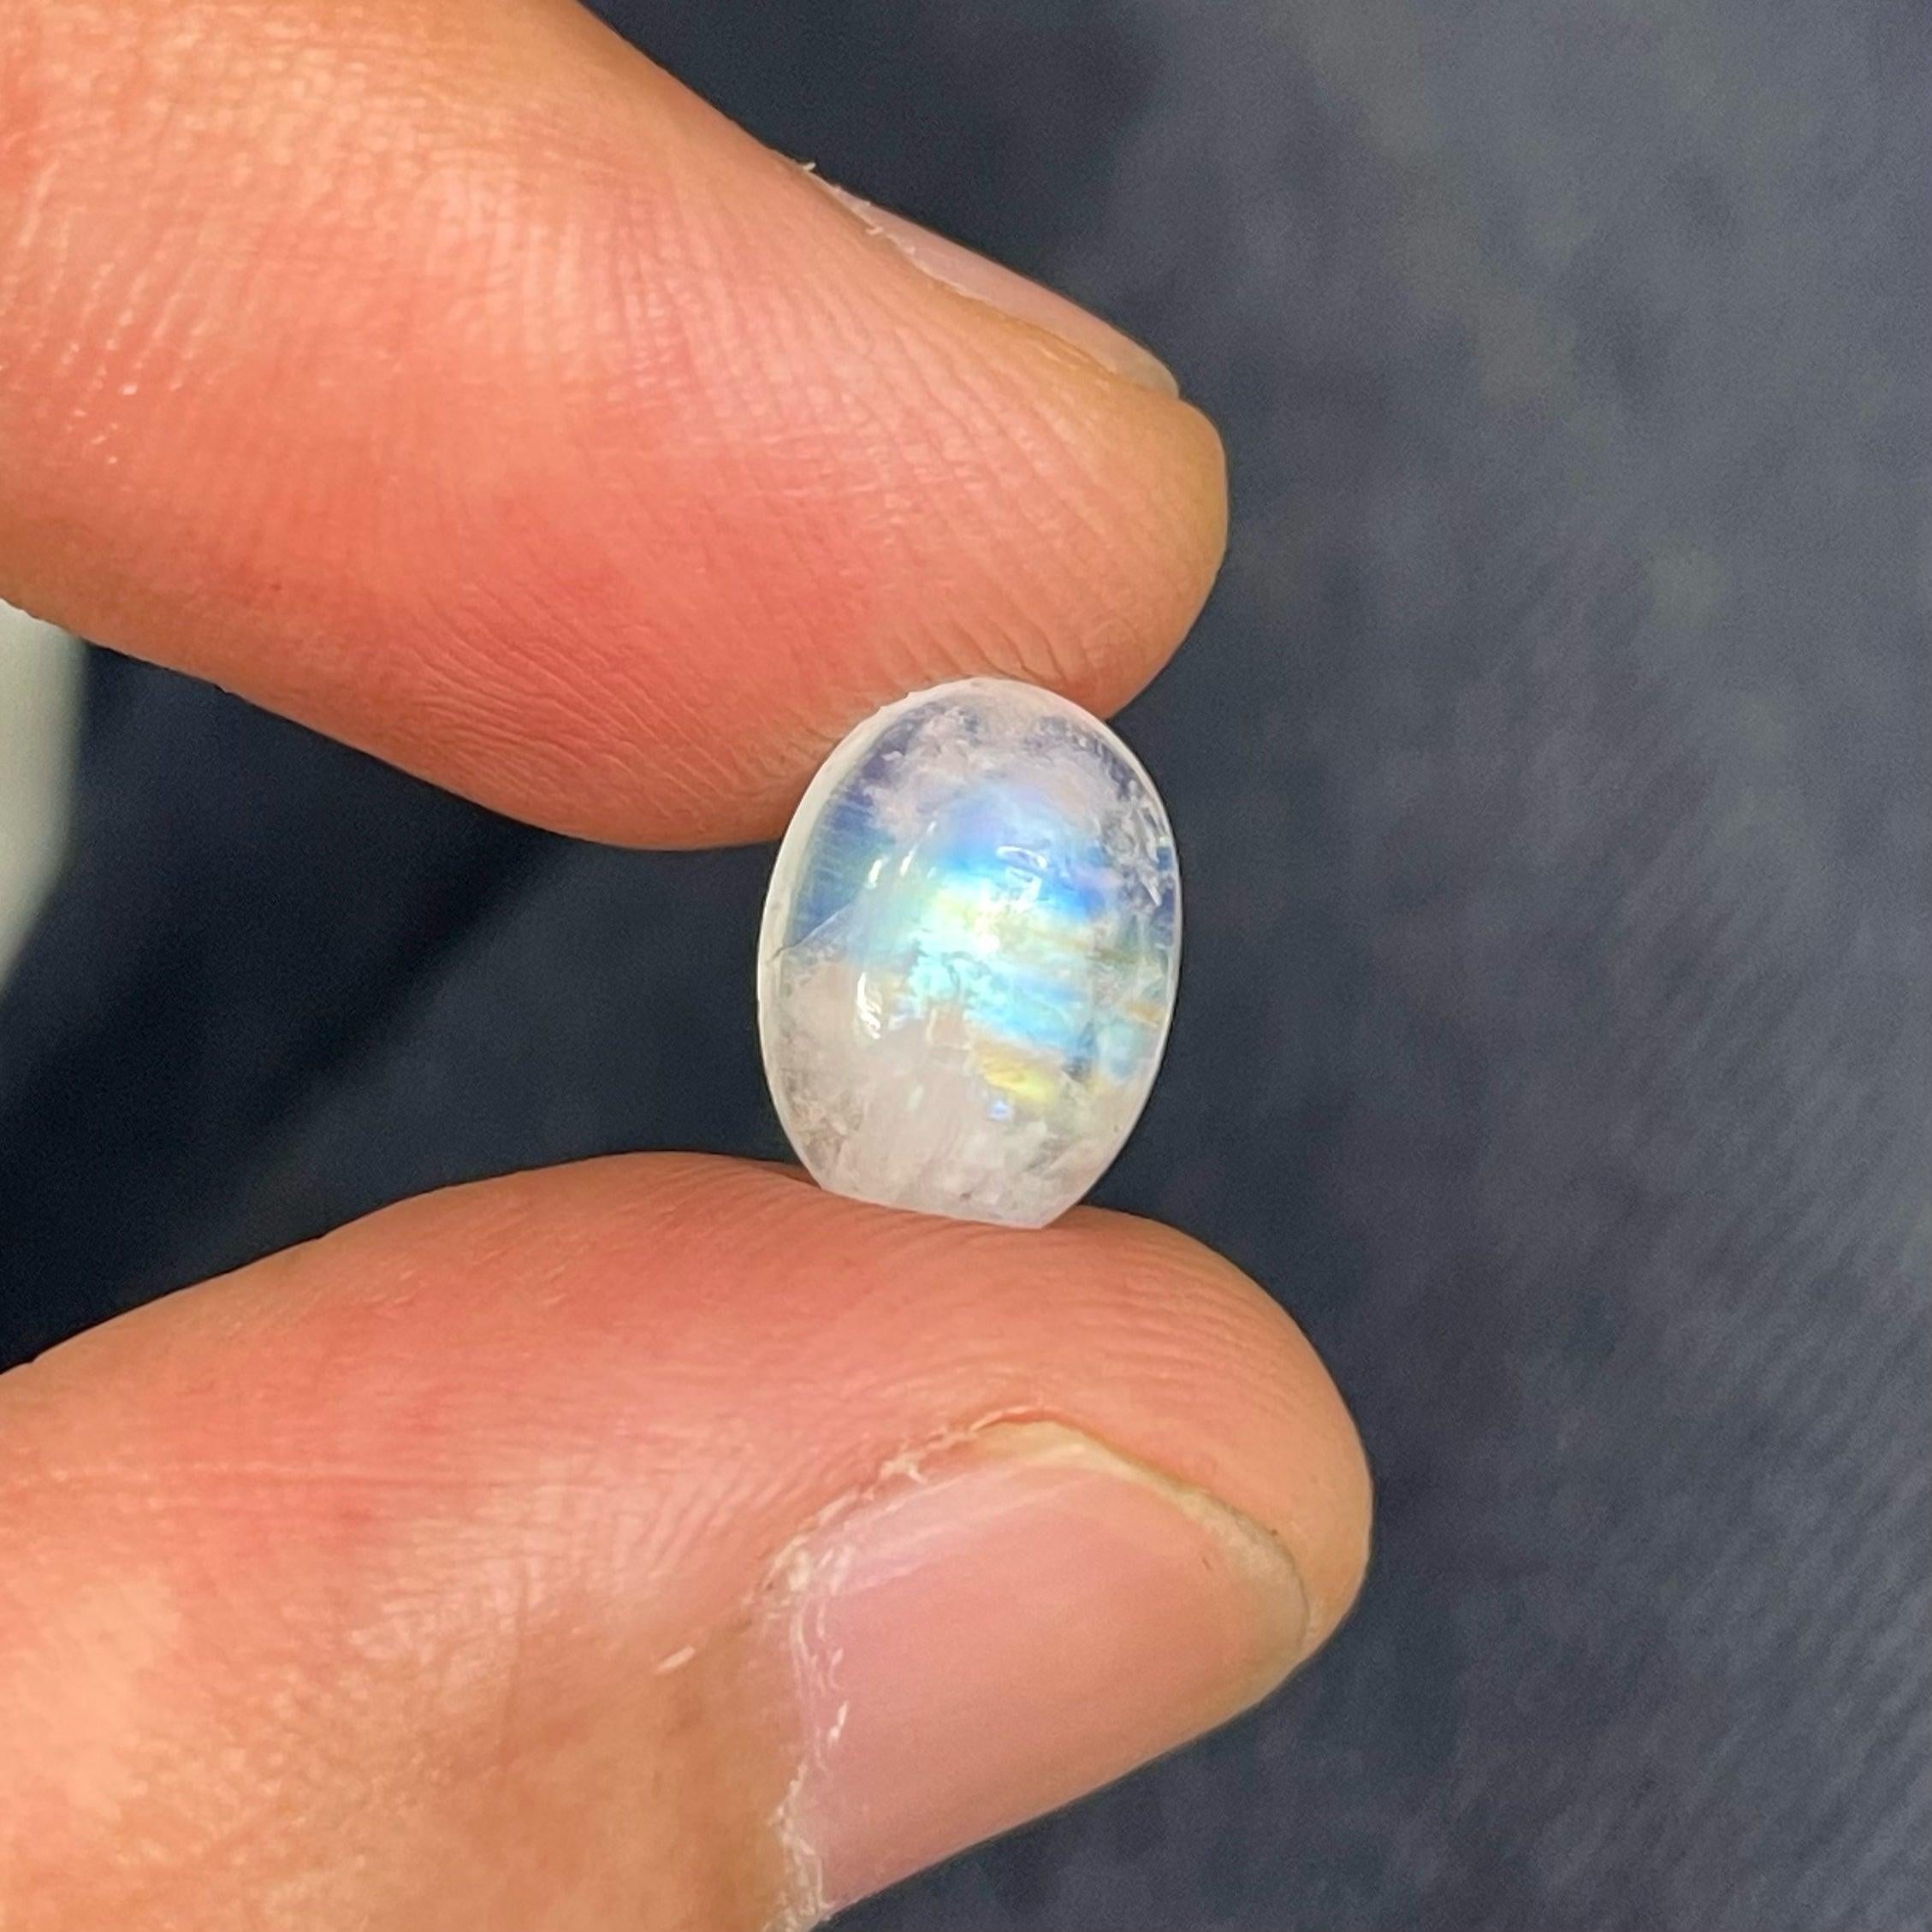 Lovely Natural Loose Moonstone Gemstone, available for sale at wholesale price, natural high-quality 2.95 carats flawless Included clarity, certified Moonstone from India.

Product Information:
GEMSTONE NAME: Lovely Natural Loose Moonstone